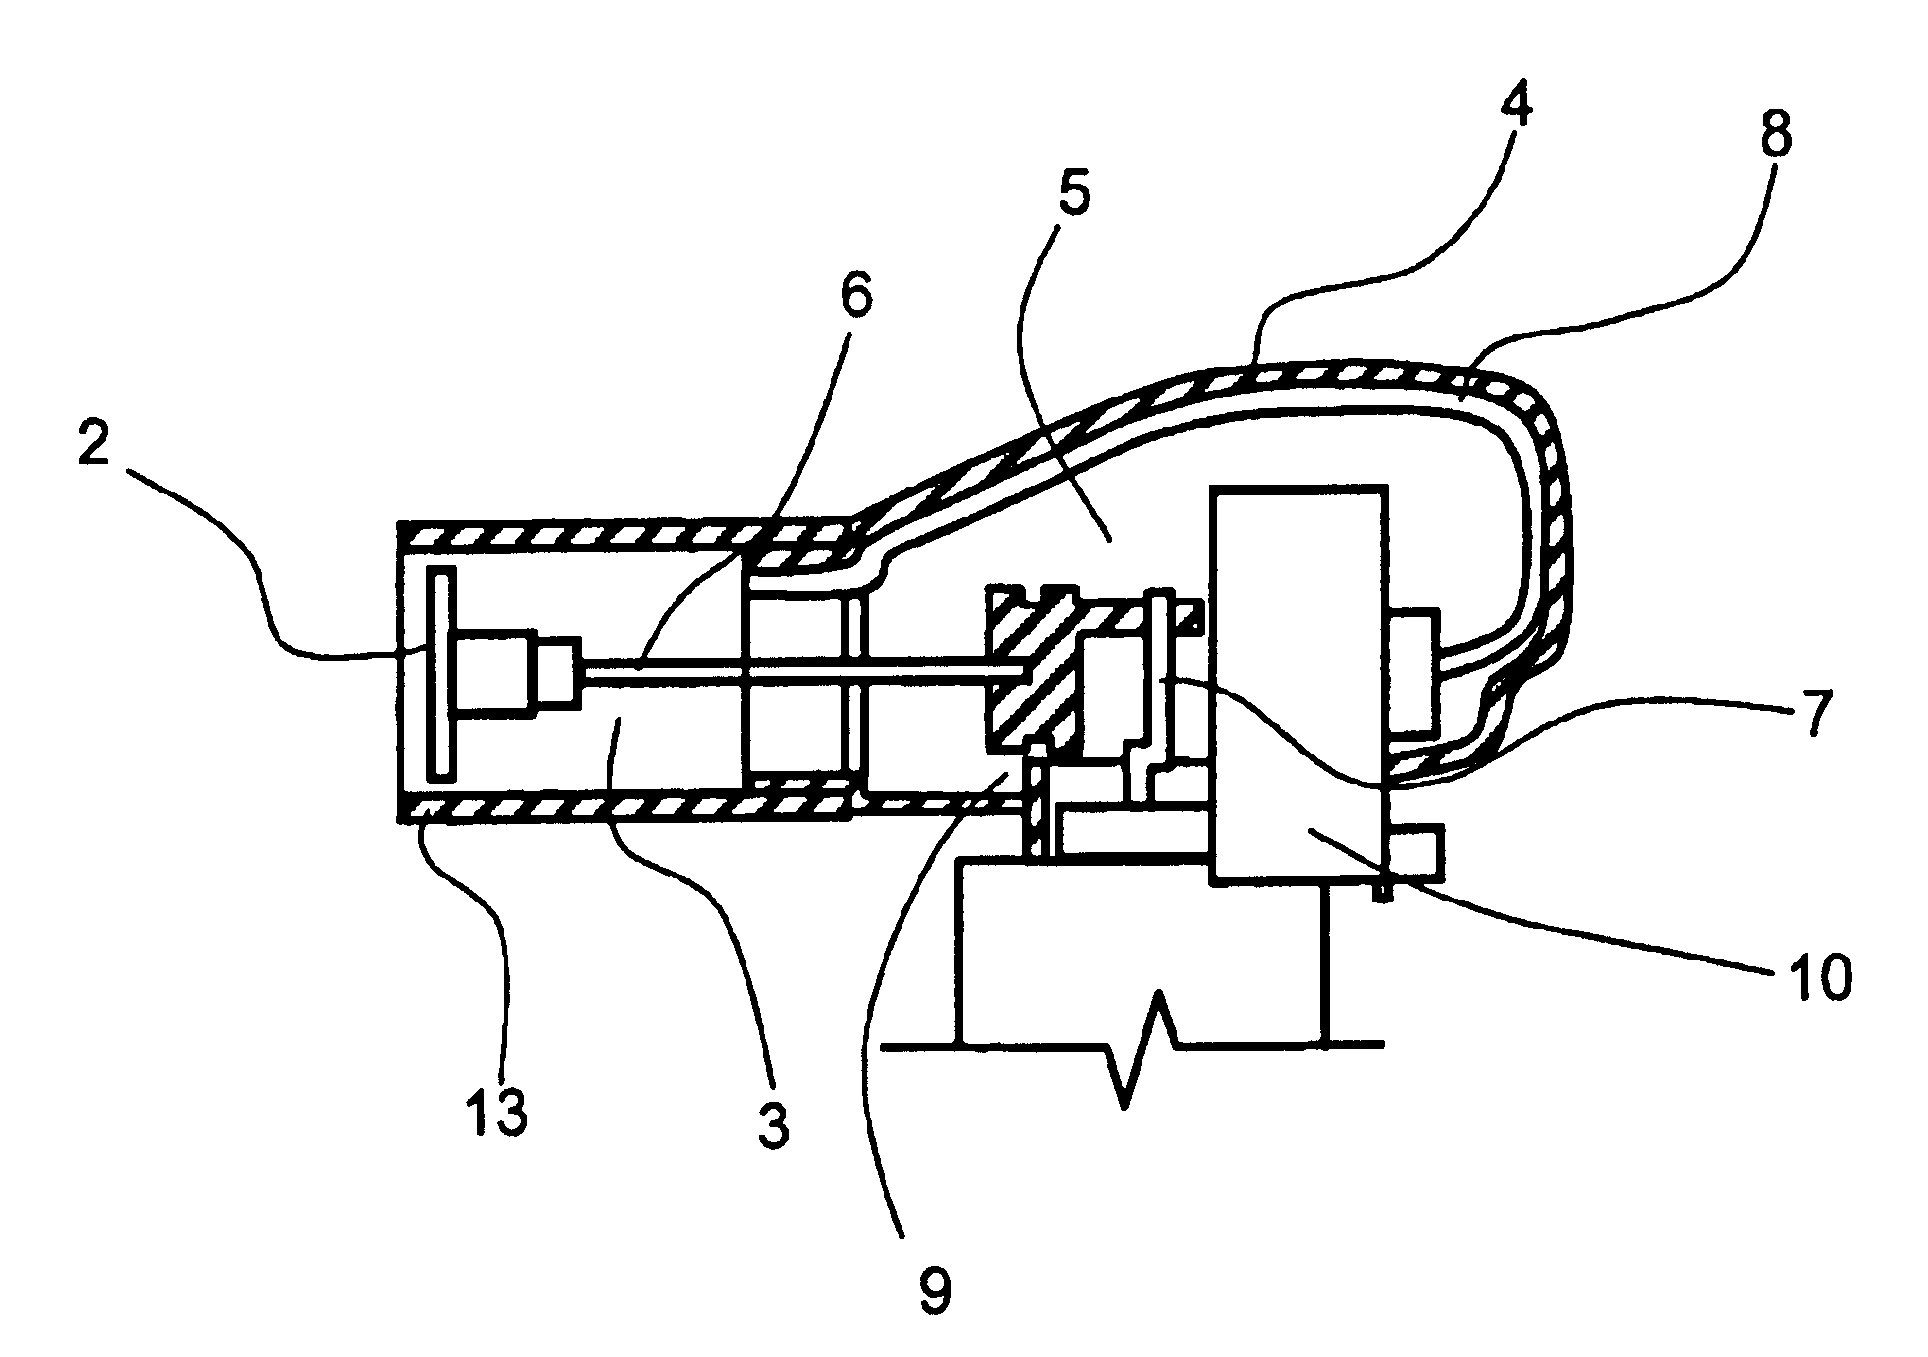 Single-hand operable microdermabrasion device